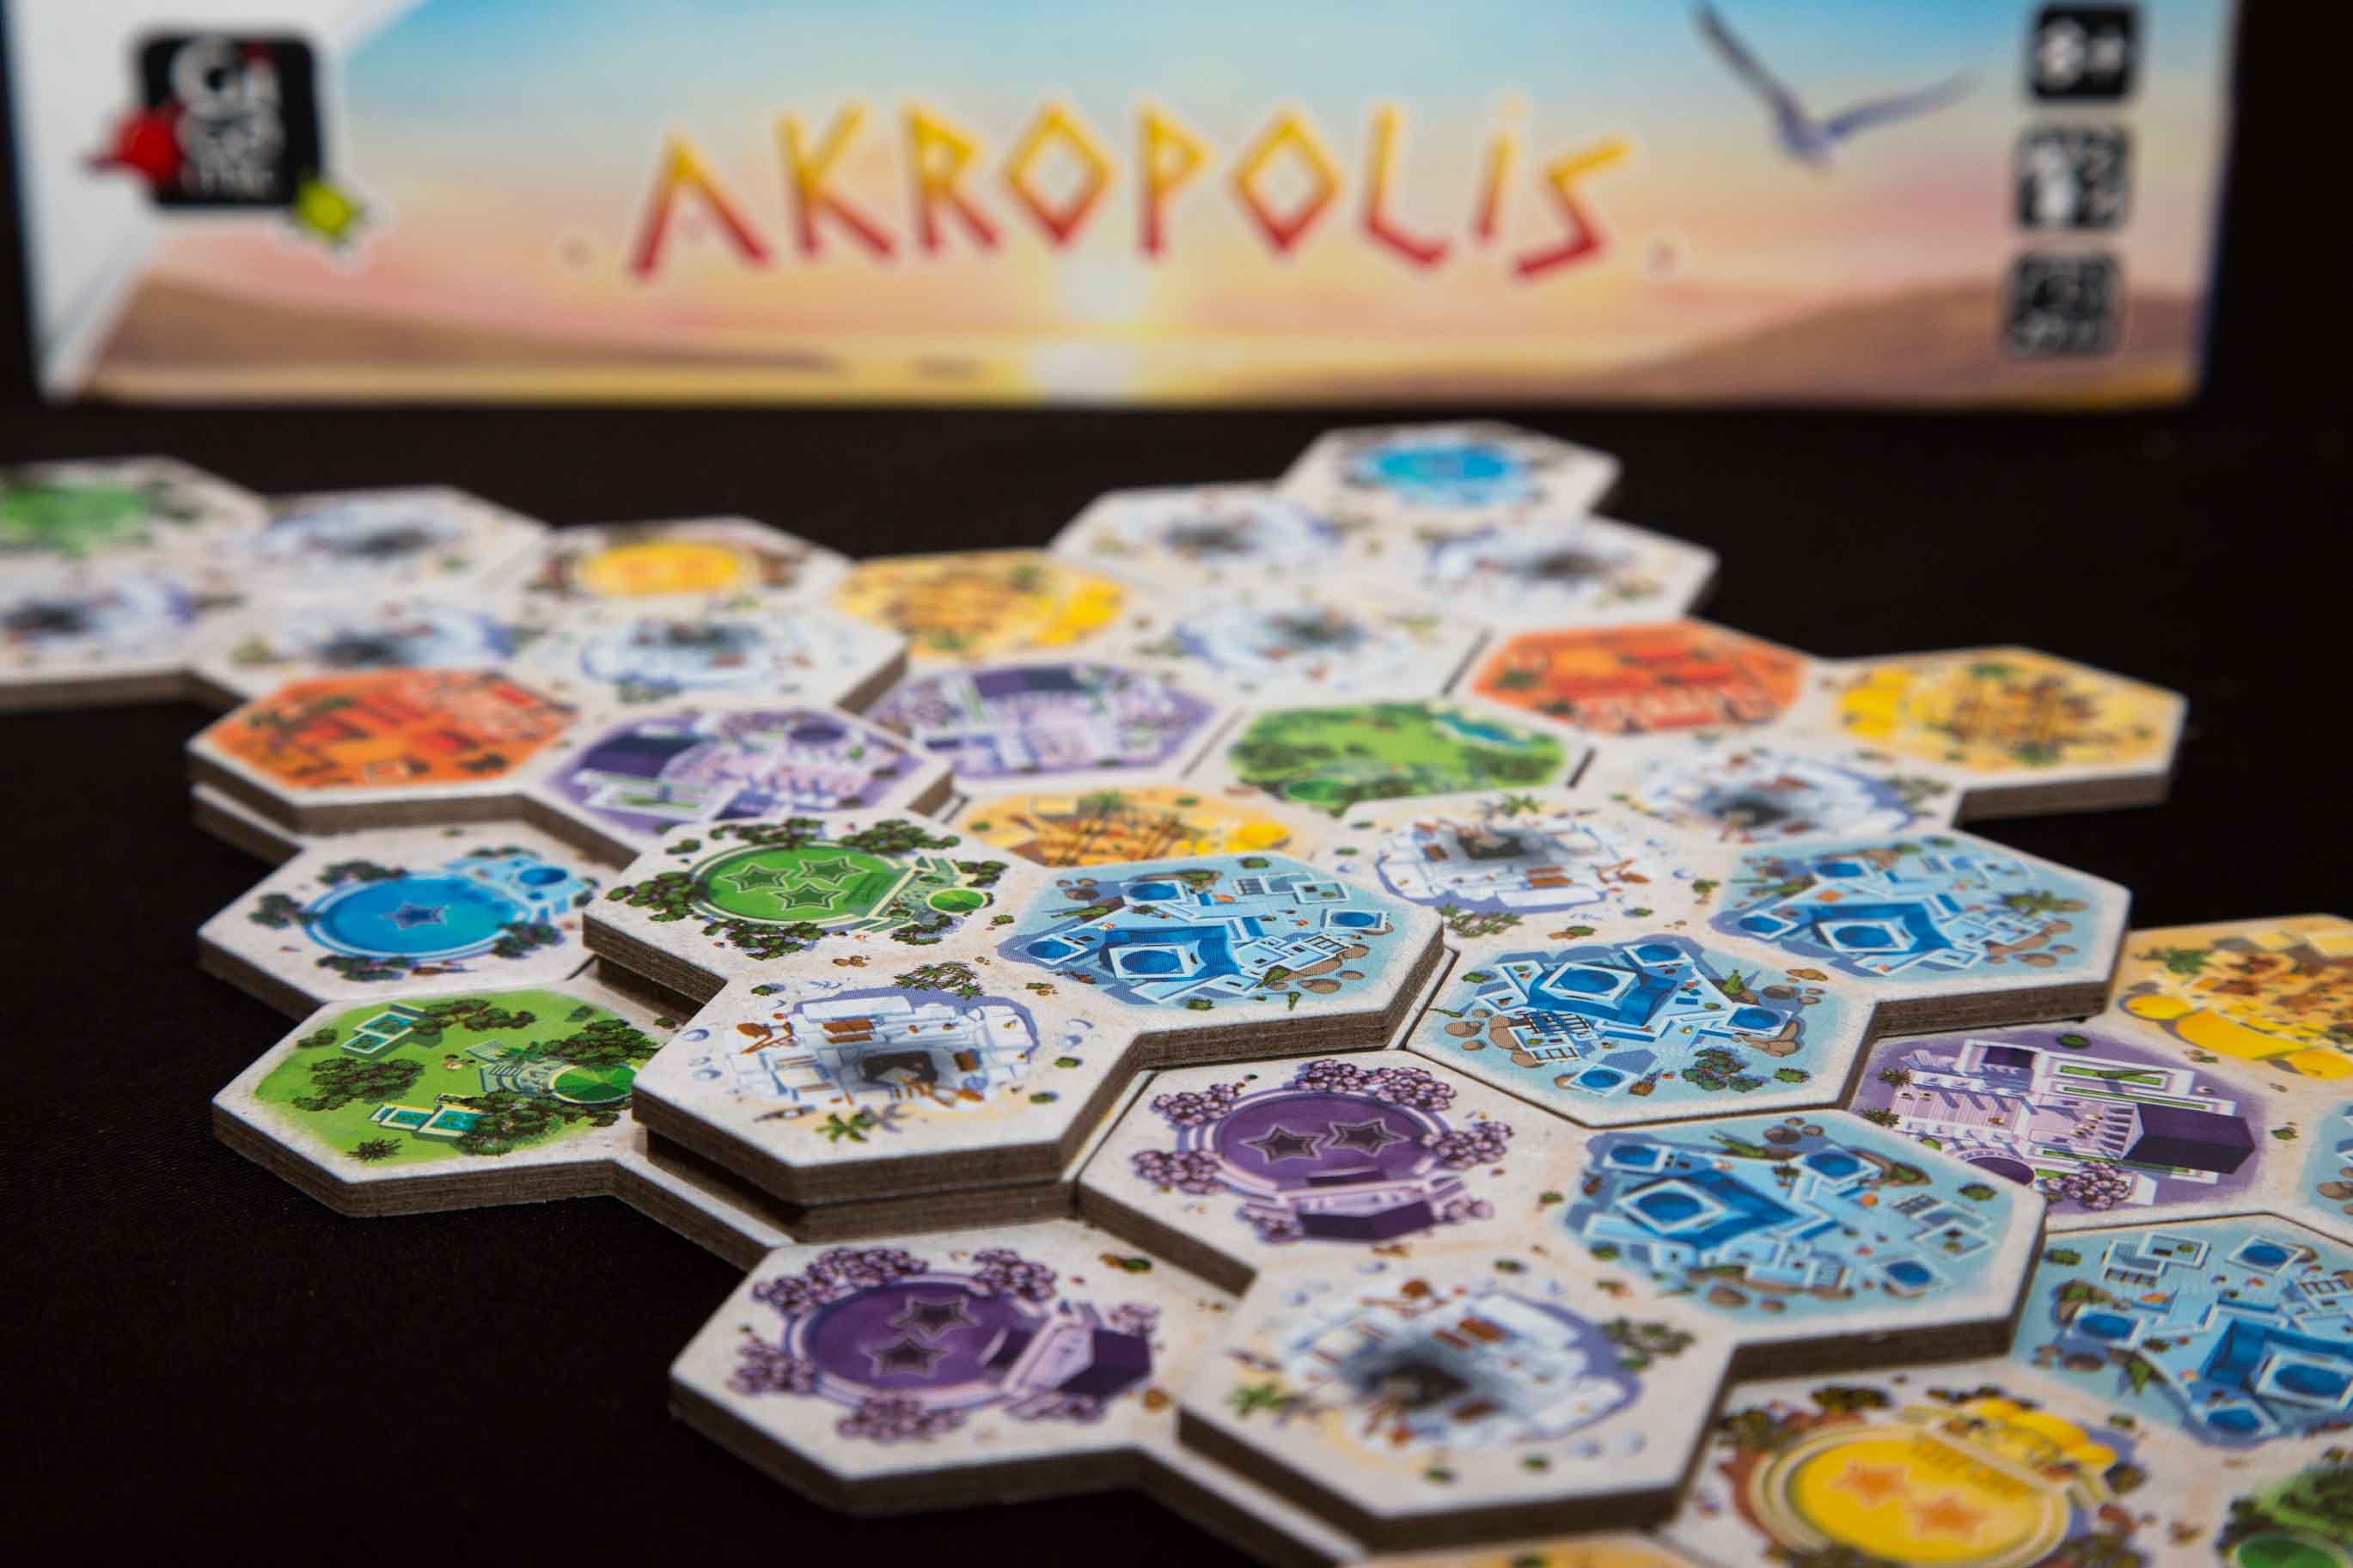 Akropolis – Final Thoughts – The Friendly Boardgamer